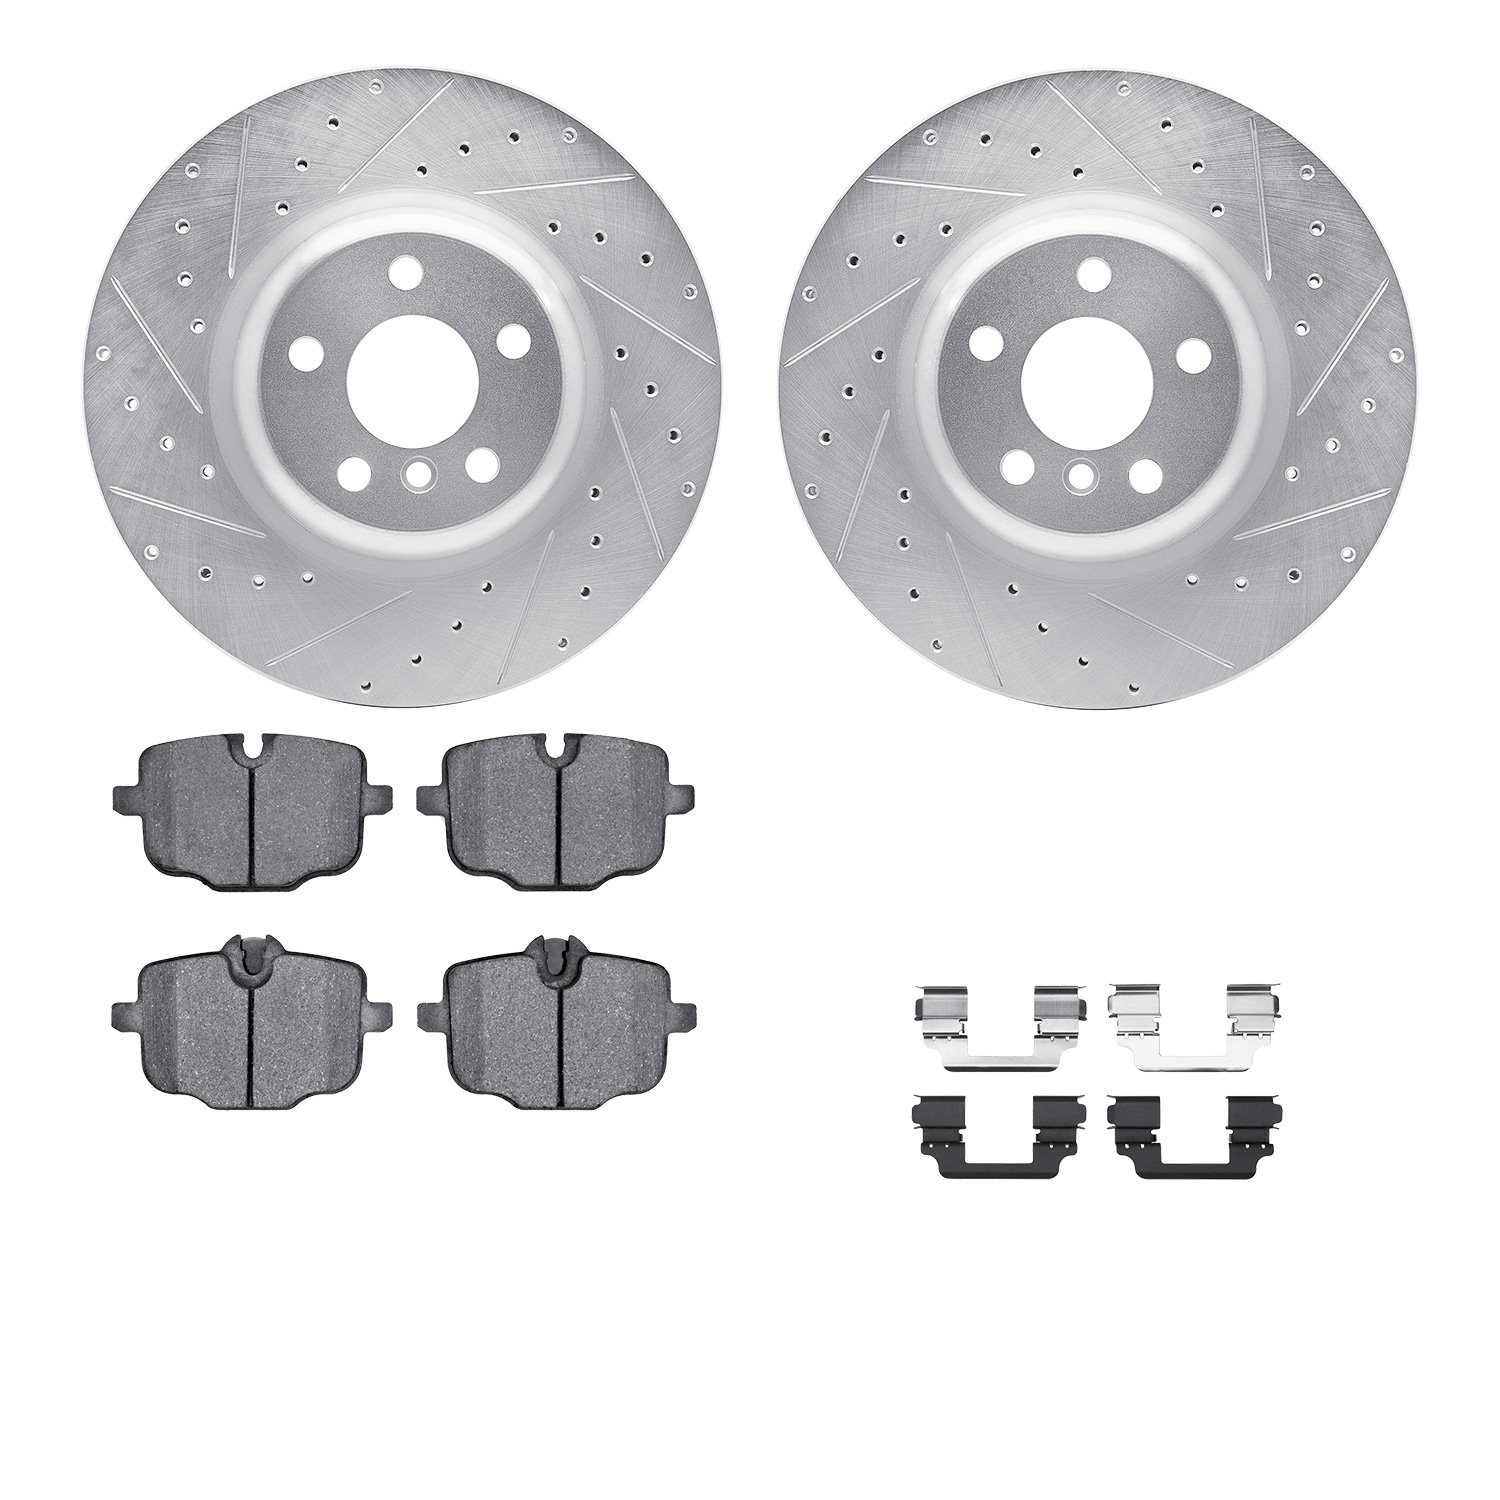 7612-31101 Drilled/Slotted Brake Rotors w/5000 Euro Ceramic Brake Pads Kit & Hardware [Silver], Fits Select BMW, Position: Rear